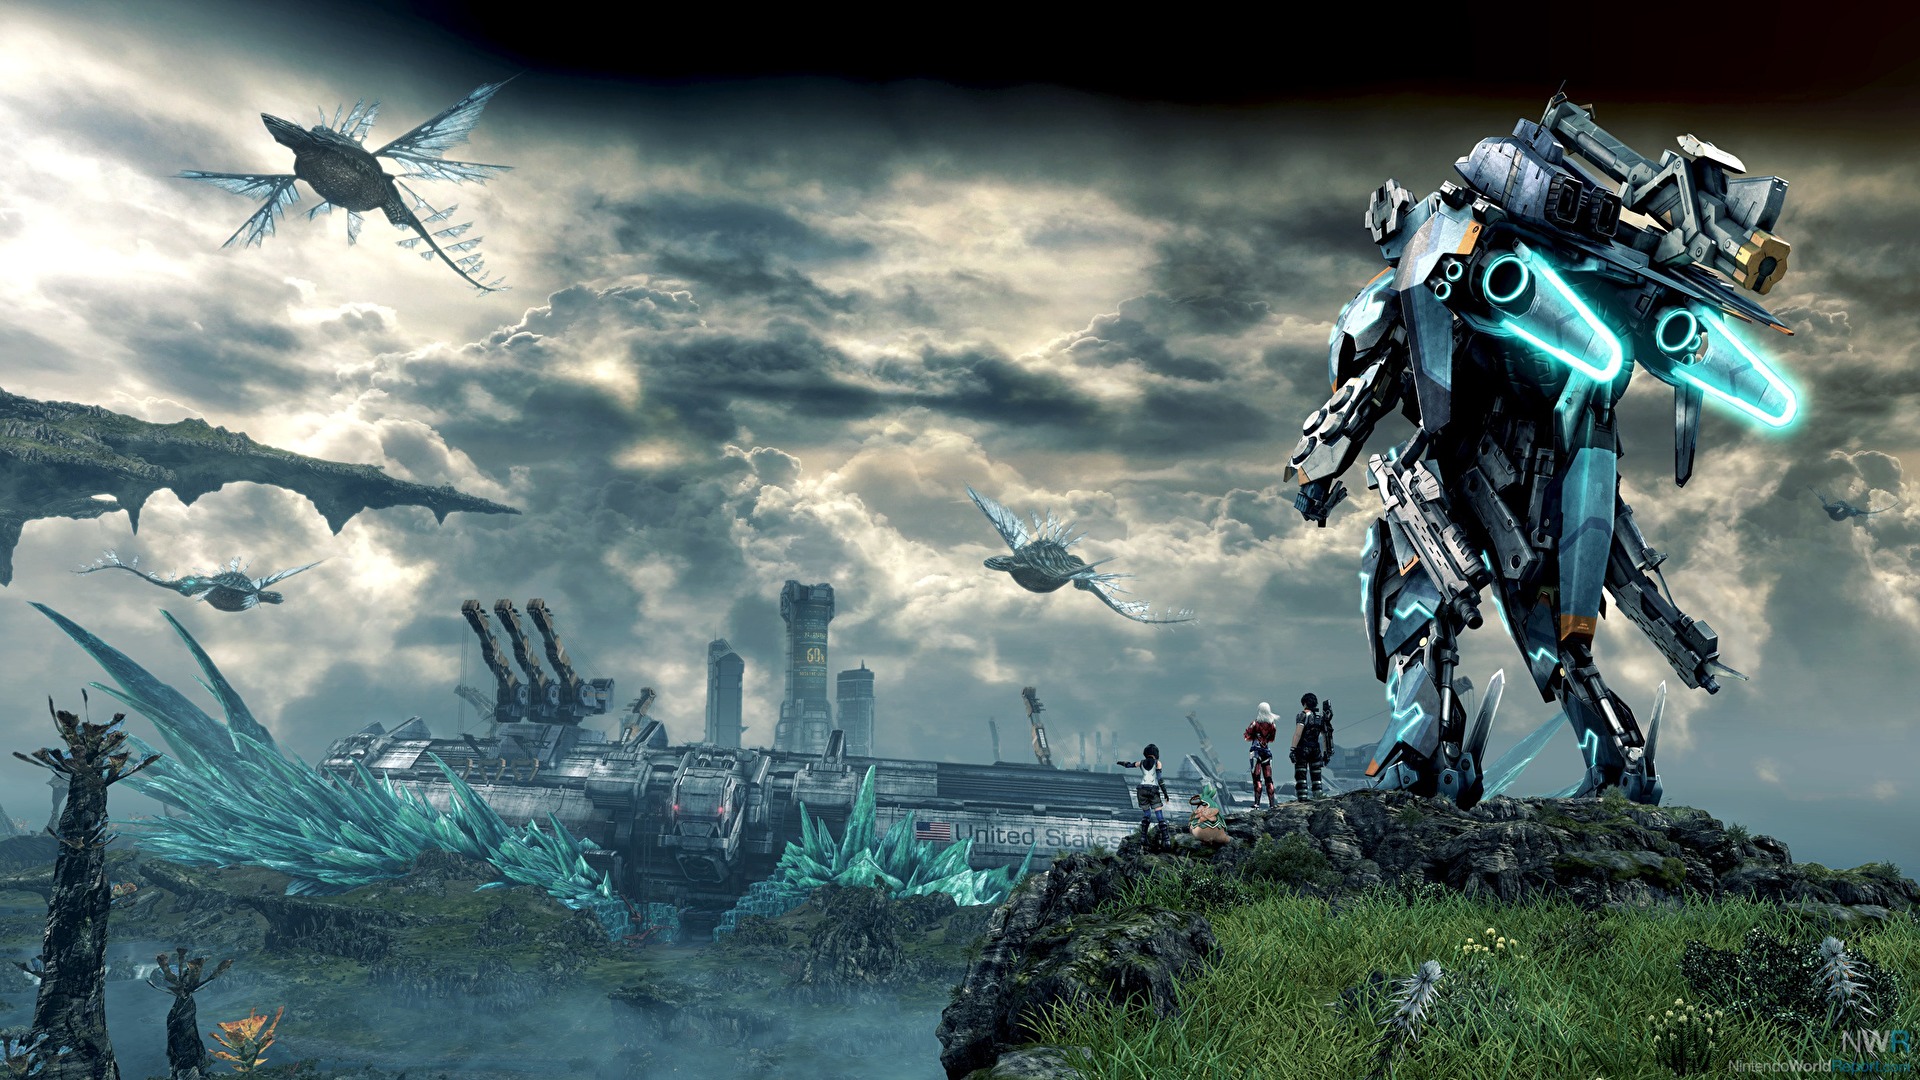 Xenoblade Chronicles X Is Bigger Than Skyrim, Fallout 4, or Witcher 3 -  Video - Nintendo World Report